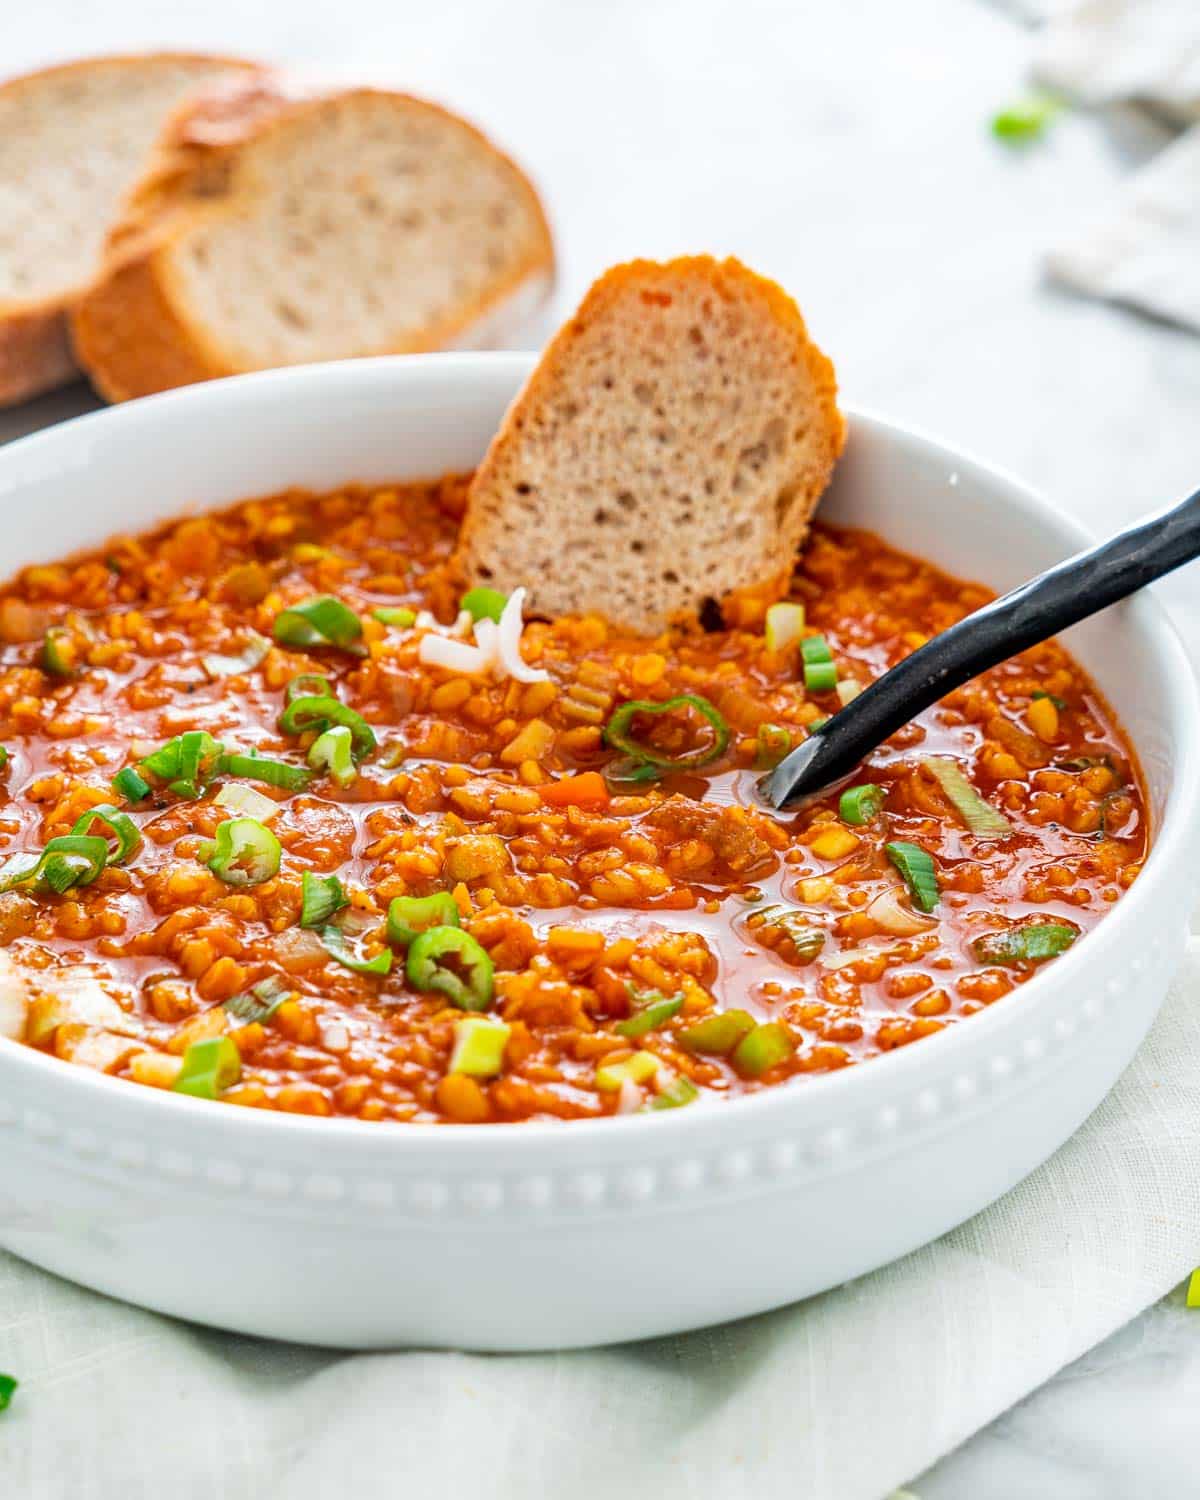 lentil soup in a white bowl with a spoon inside and a slice of bread, garnished with green onions